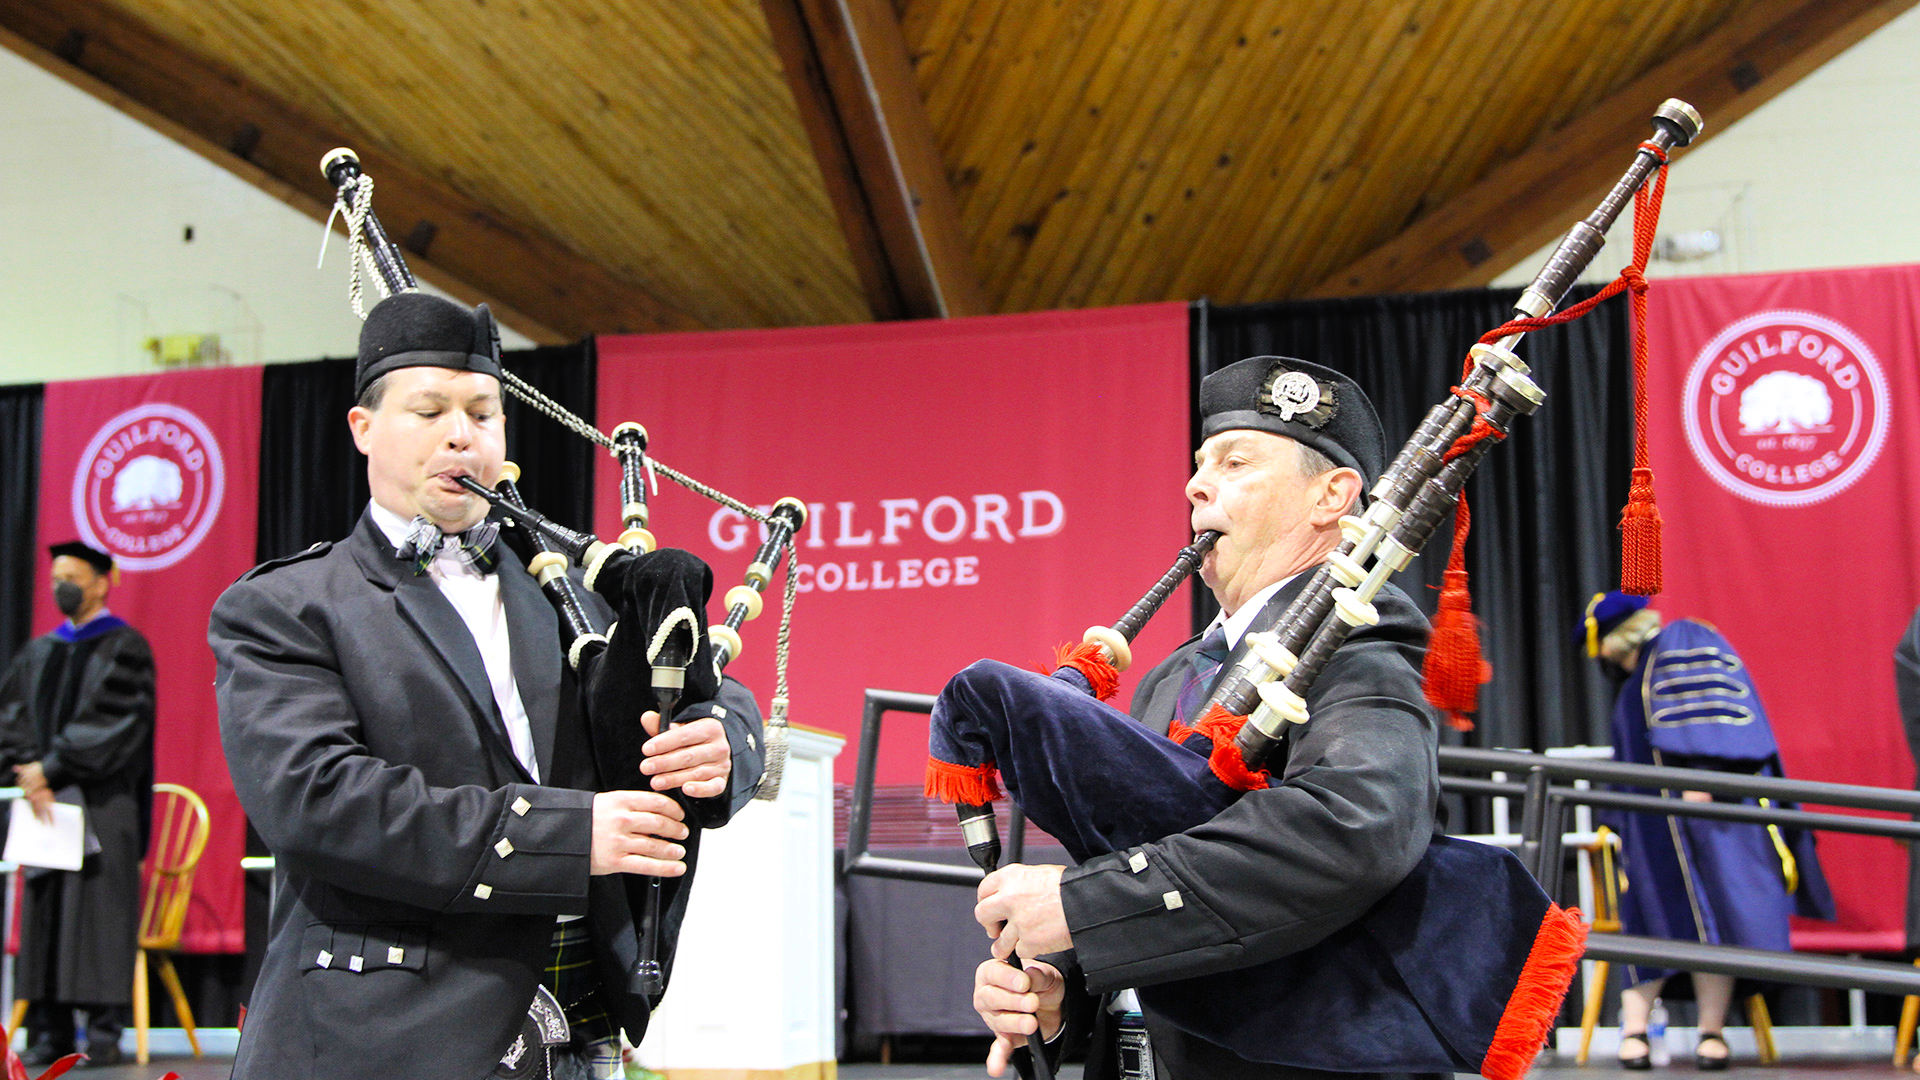 Two bagpipers perform at the start of Commencement.